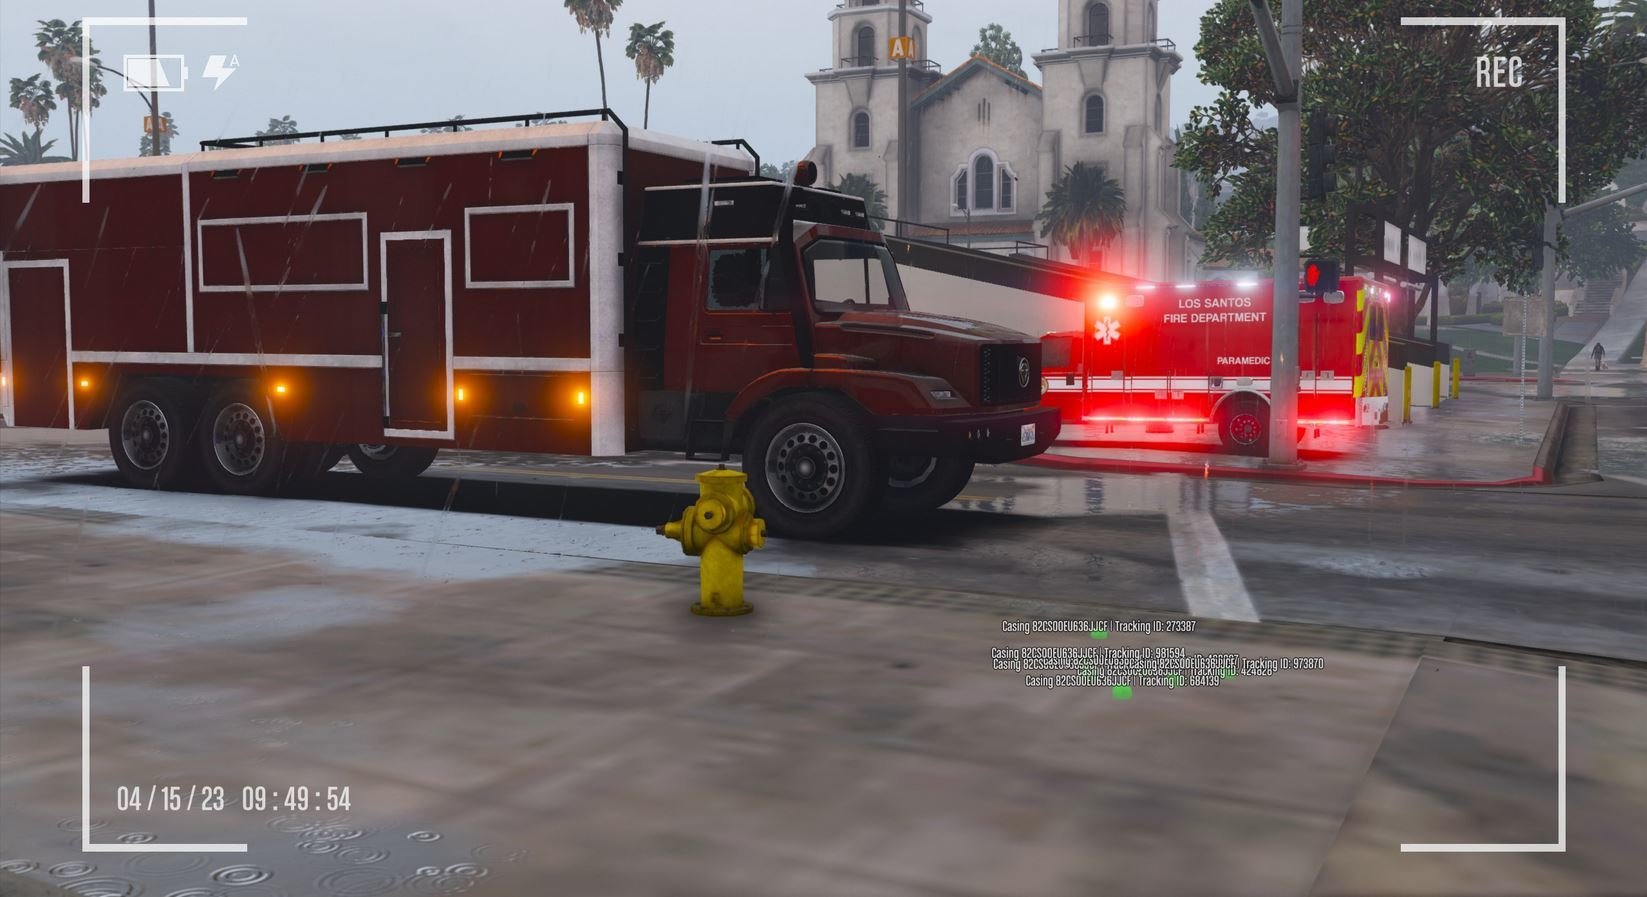 Truck heist gone wrong but the medics are there to save the day!